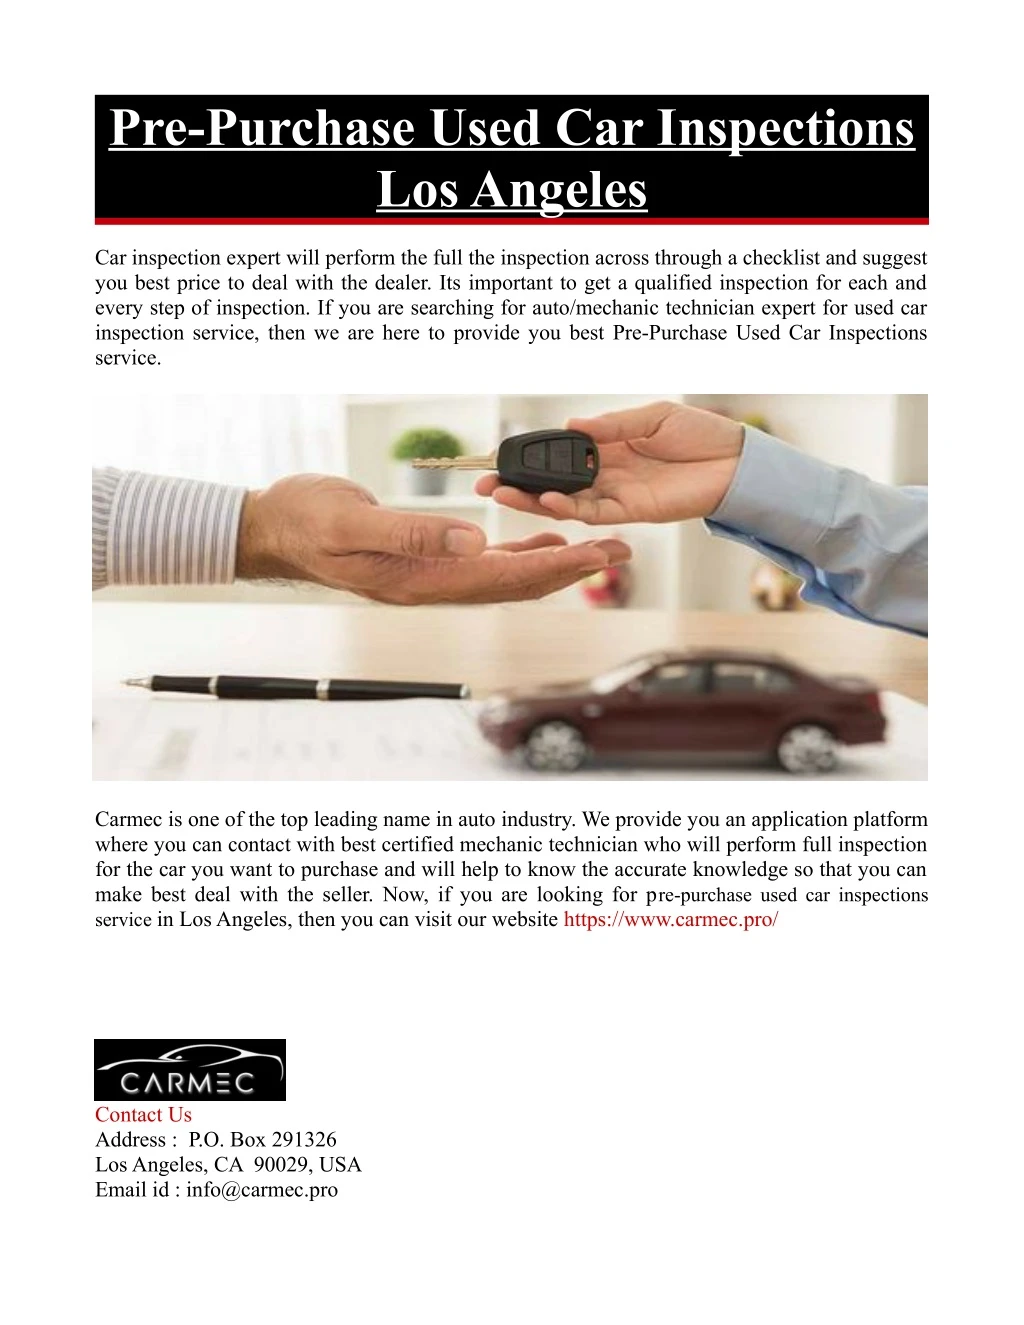 pre purchase used car inspections los angeles